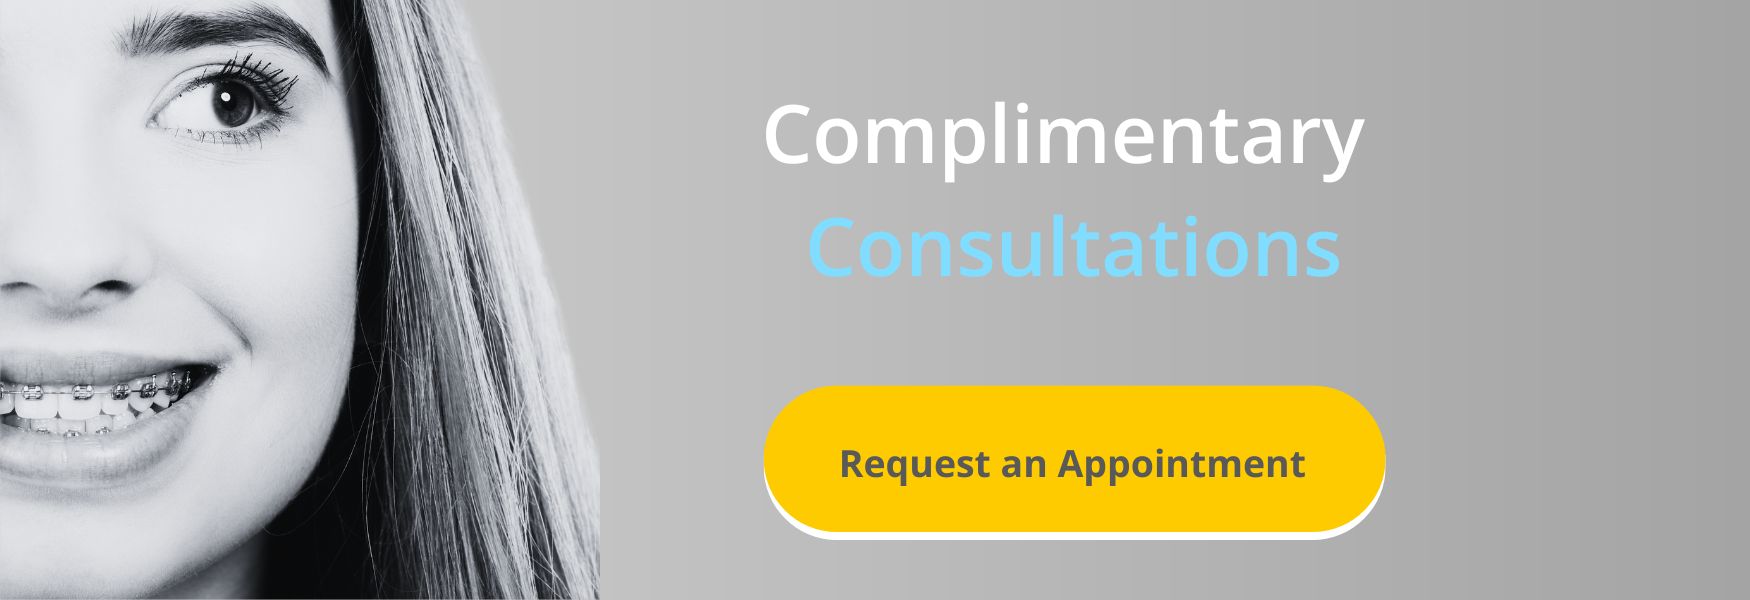 Complimentary Orthodontic Consultations in Fond du Lac. Click to Request an Appointment